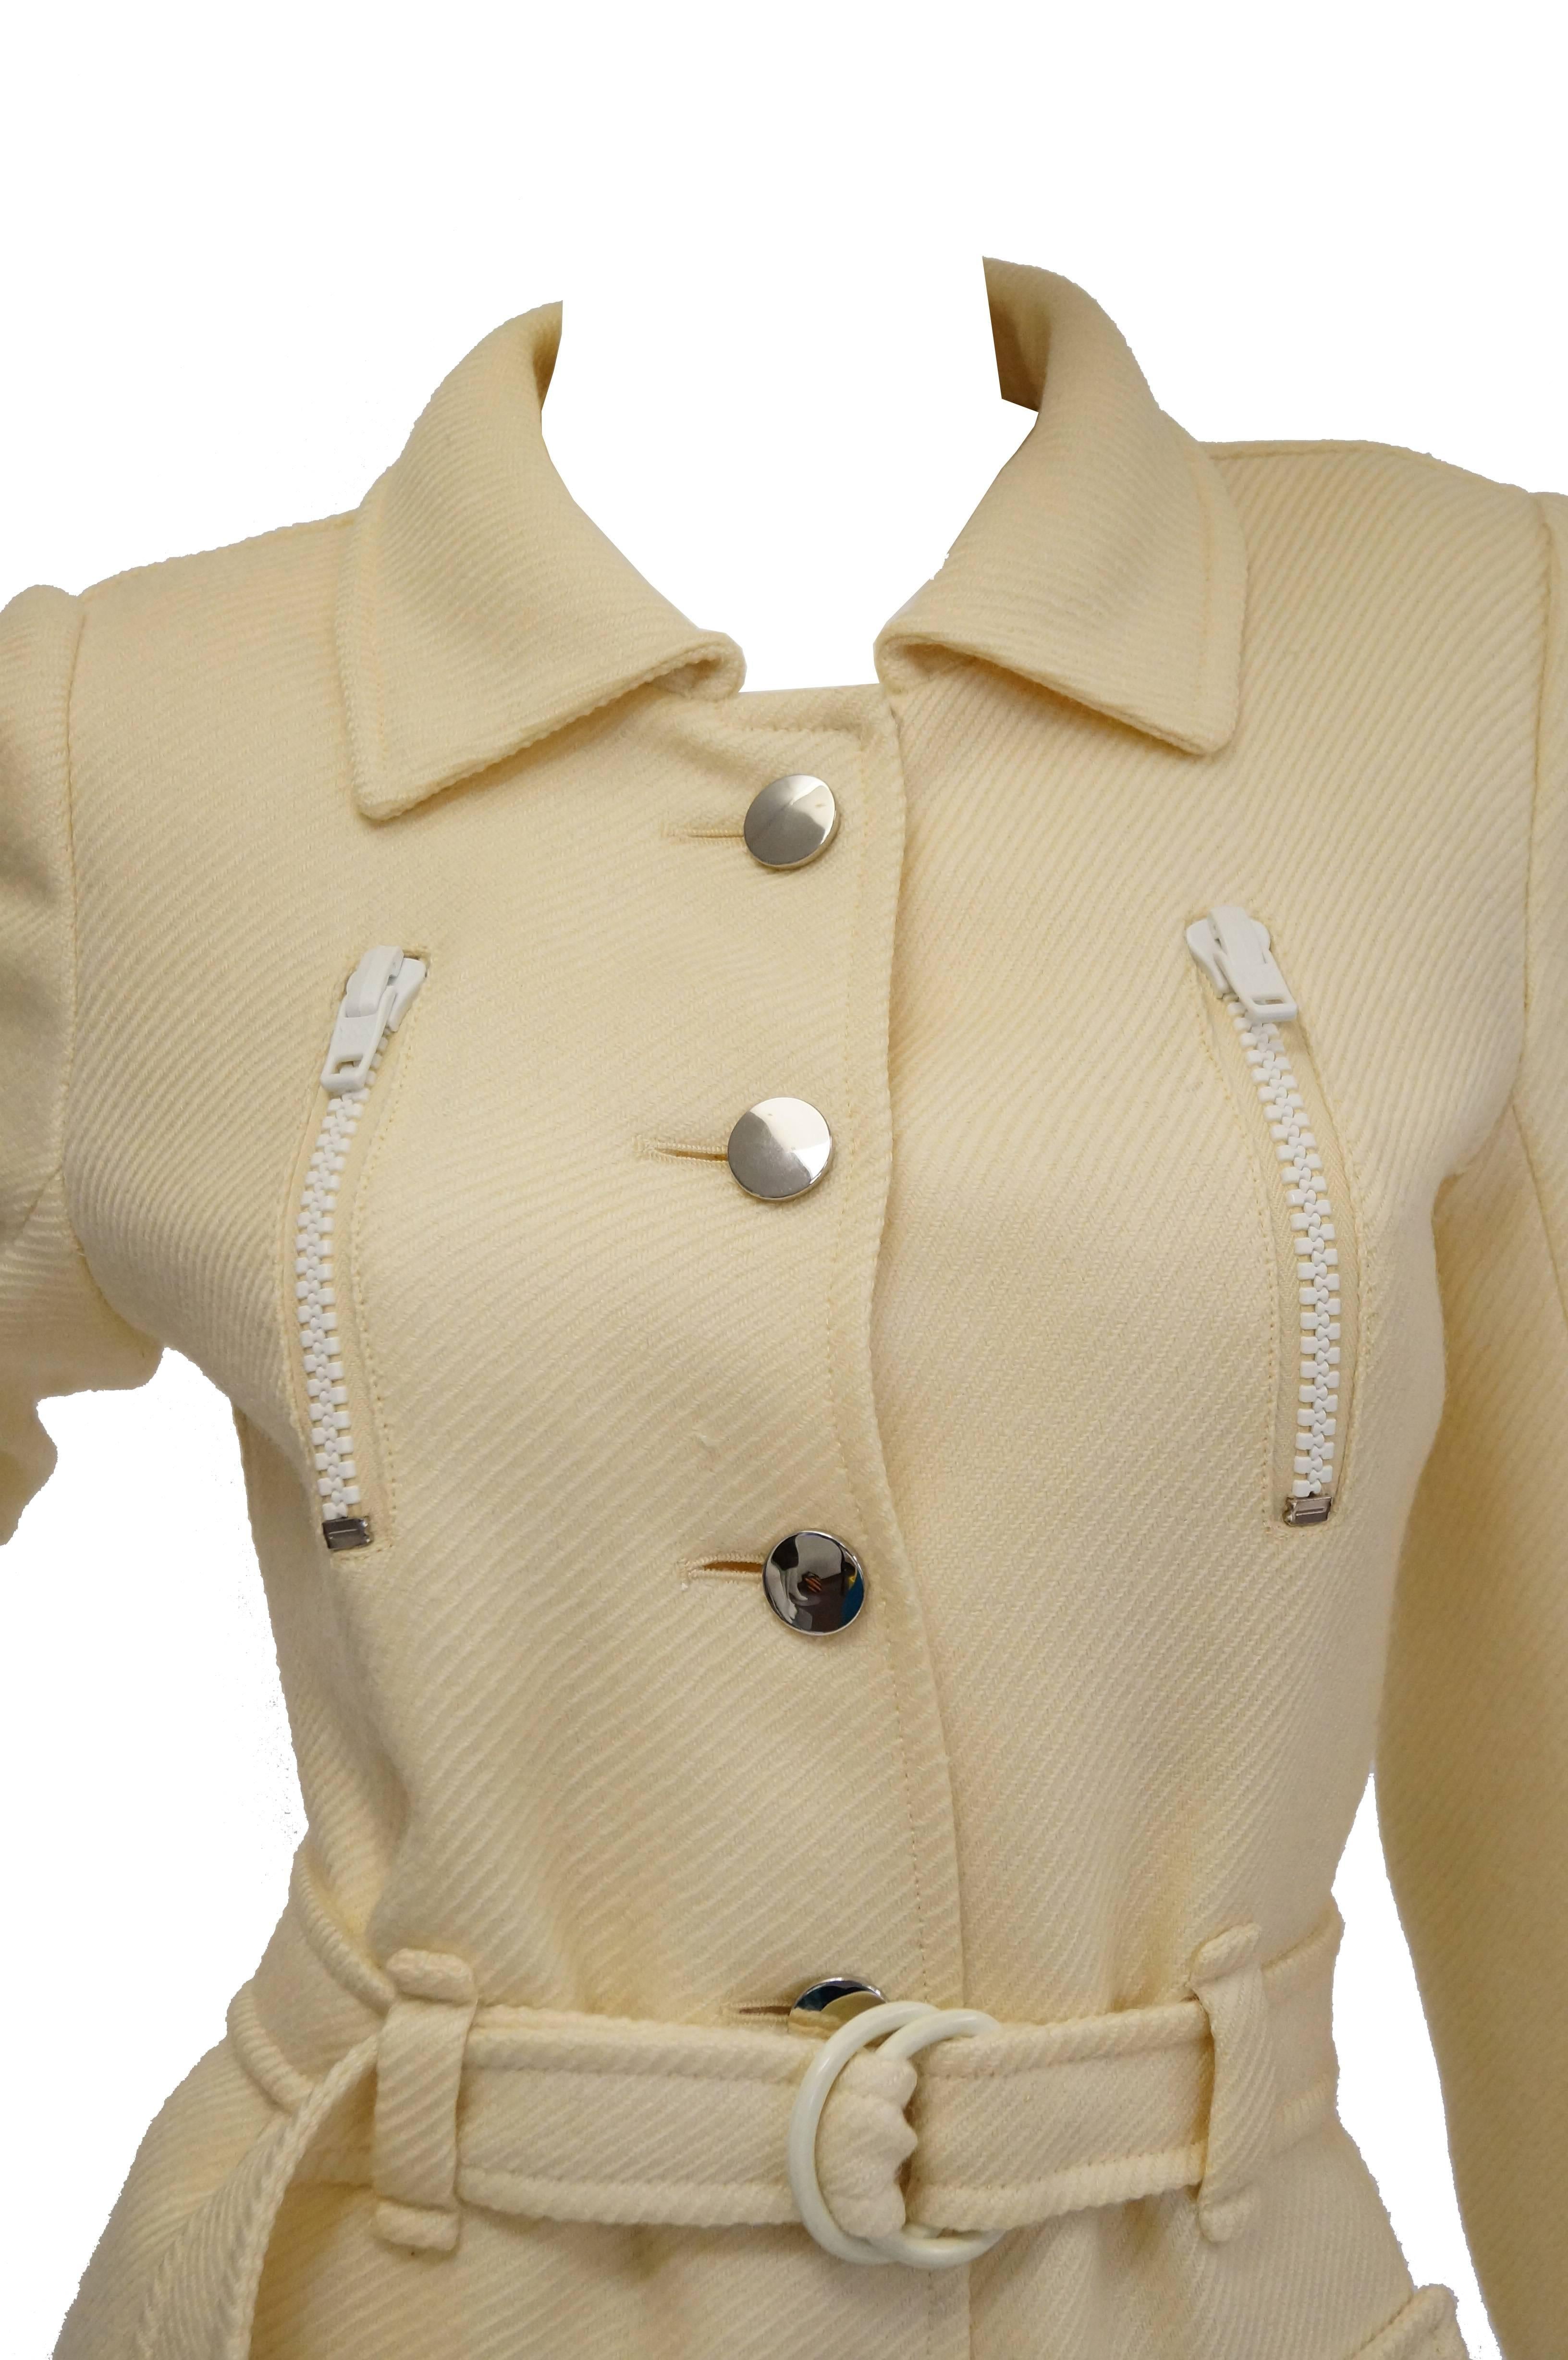 Cream mod coat by Courreges. The coat has a flat collar, long sleeves, and hits hits just below the knee. The sleeves are cuffed and have the same chrome buttons features throughout the coat. The coat is single breasted and features ten large,